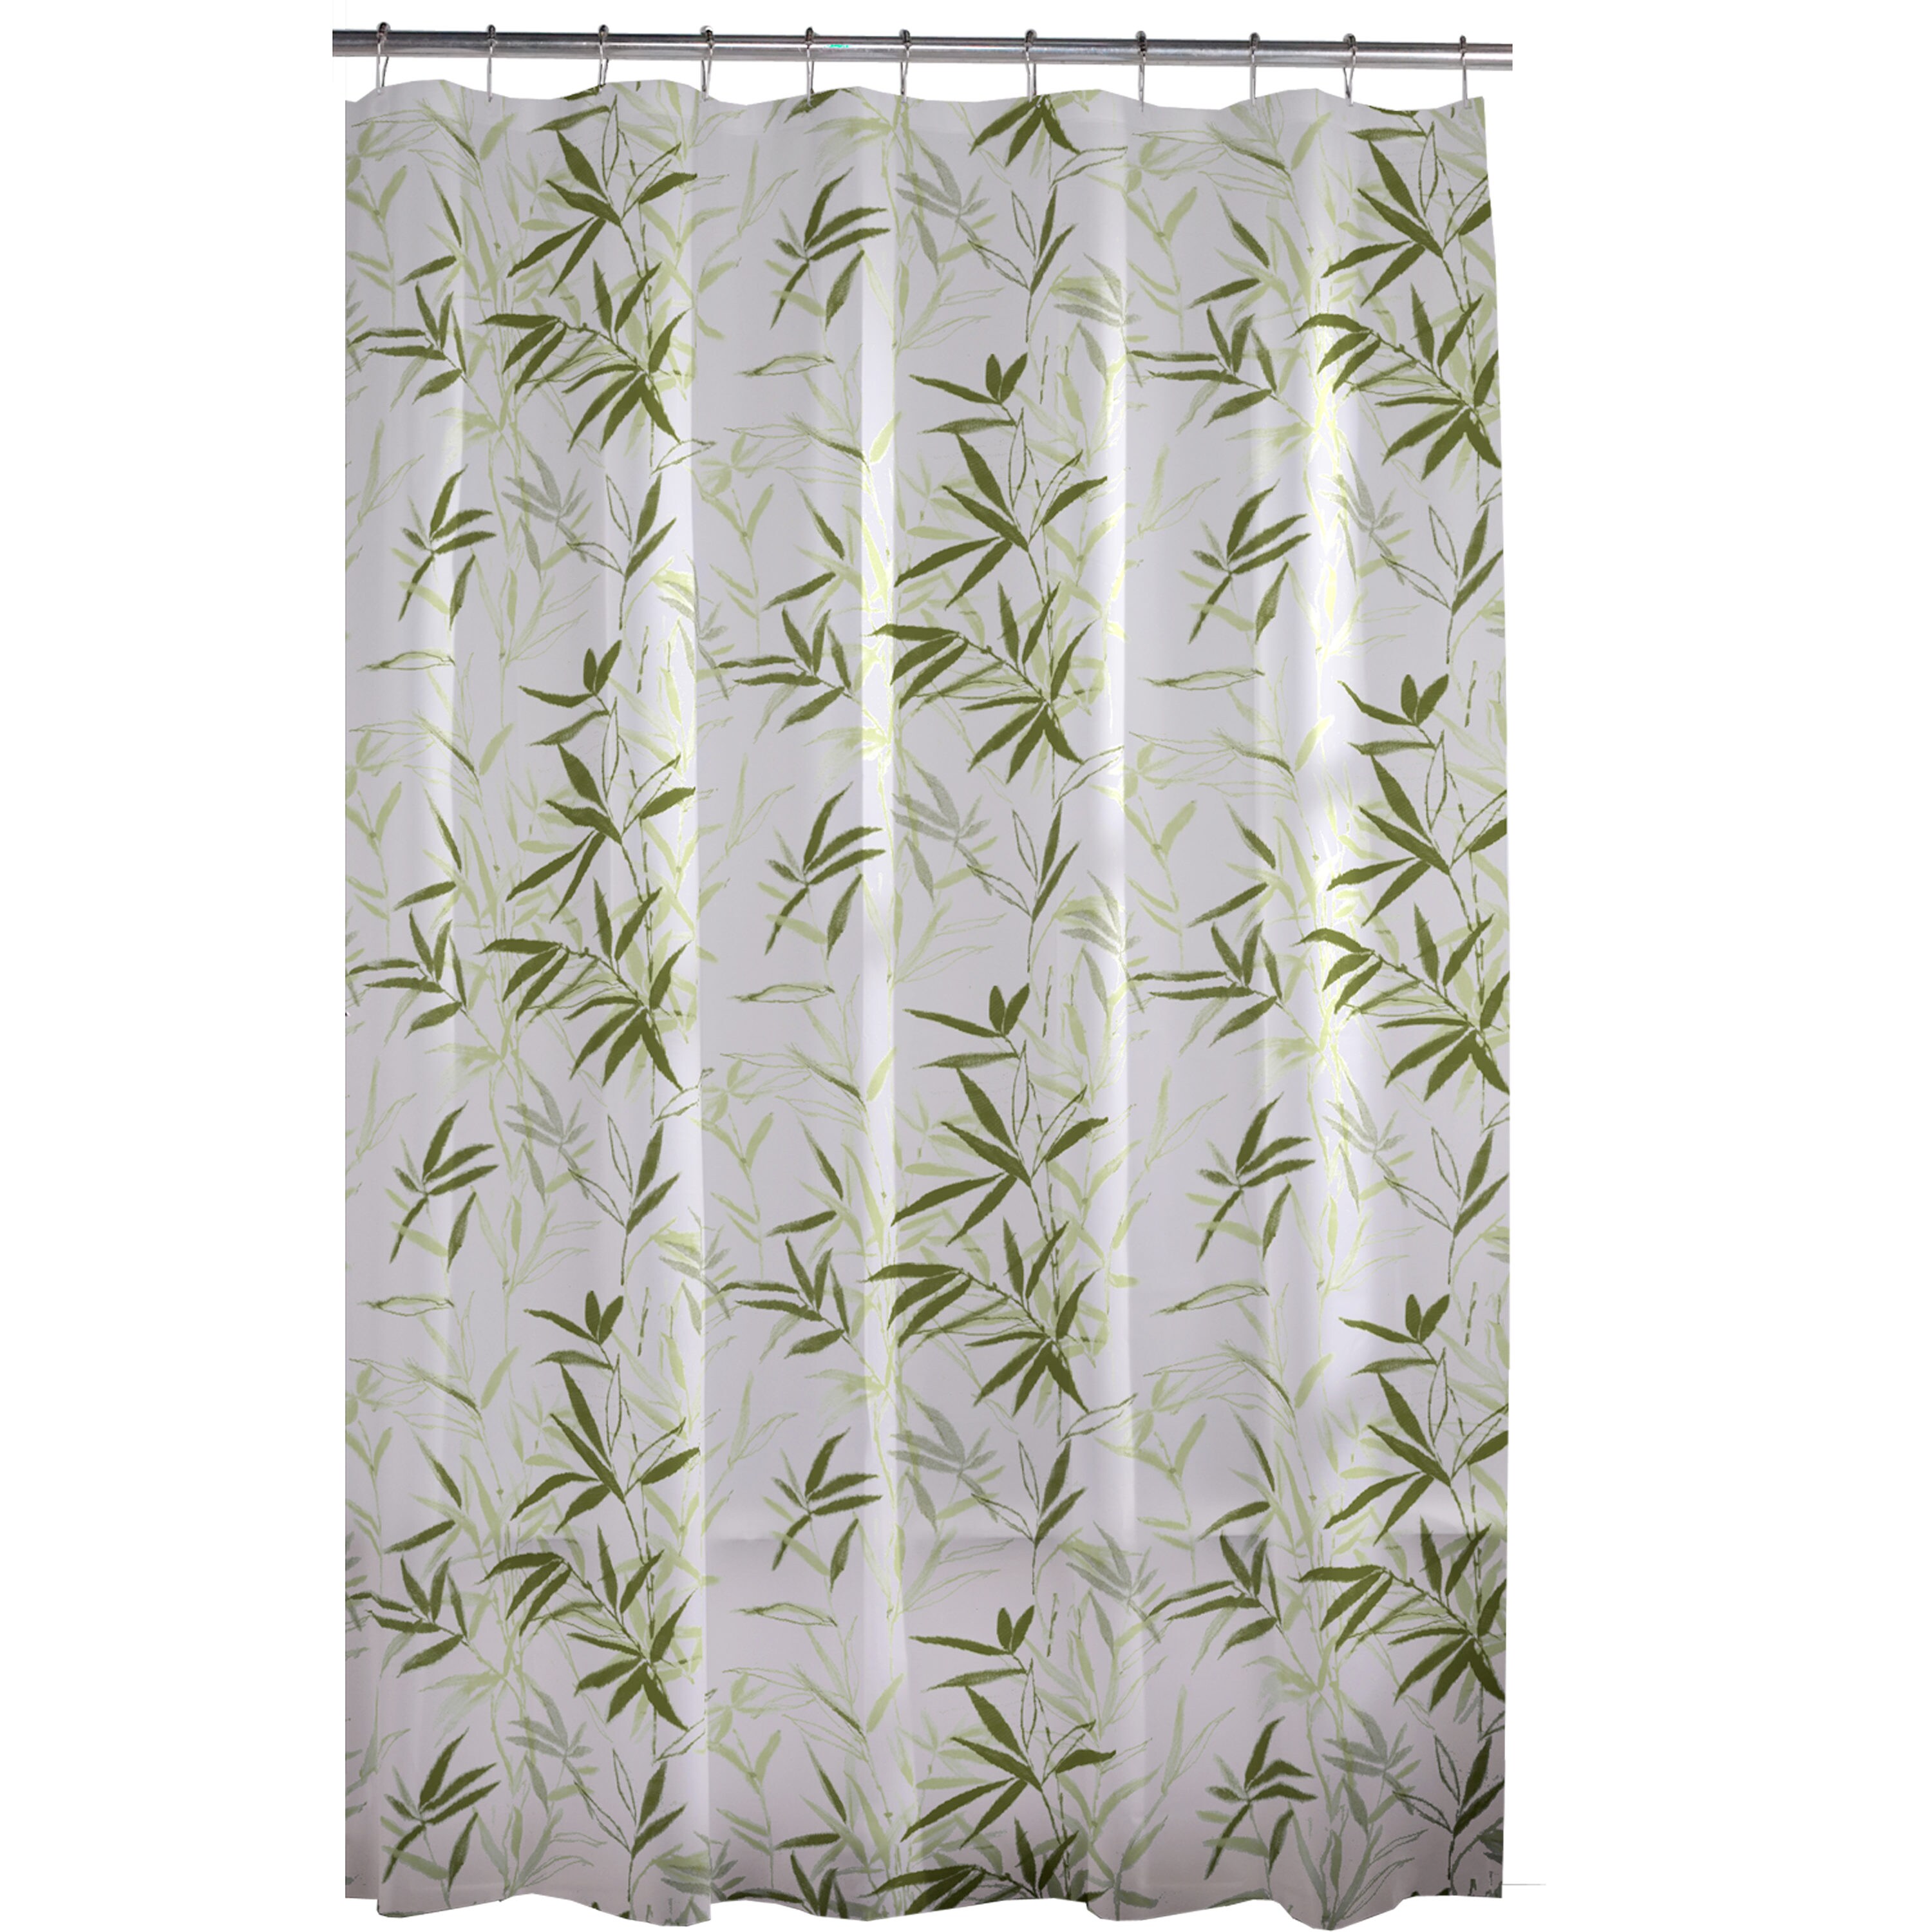 Black White Stripes Tropical Leaves Flowers 72" Waterproof Fabric Shower Curtain 